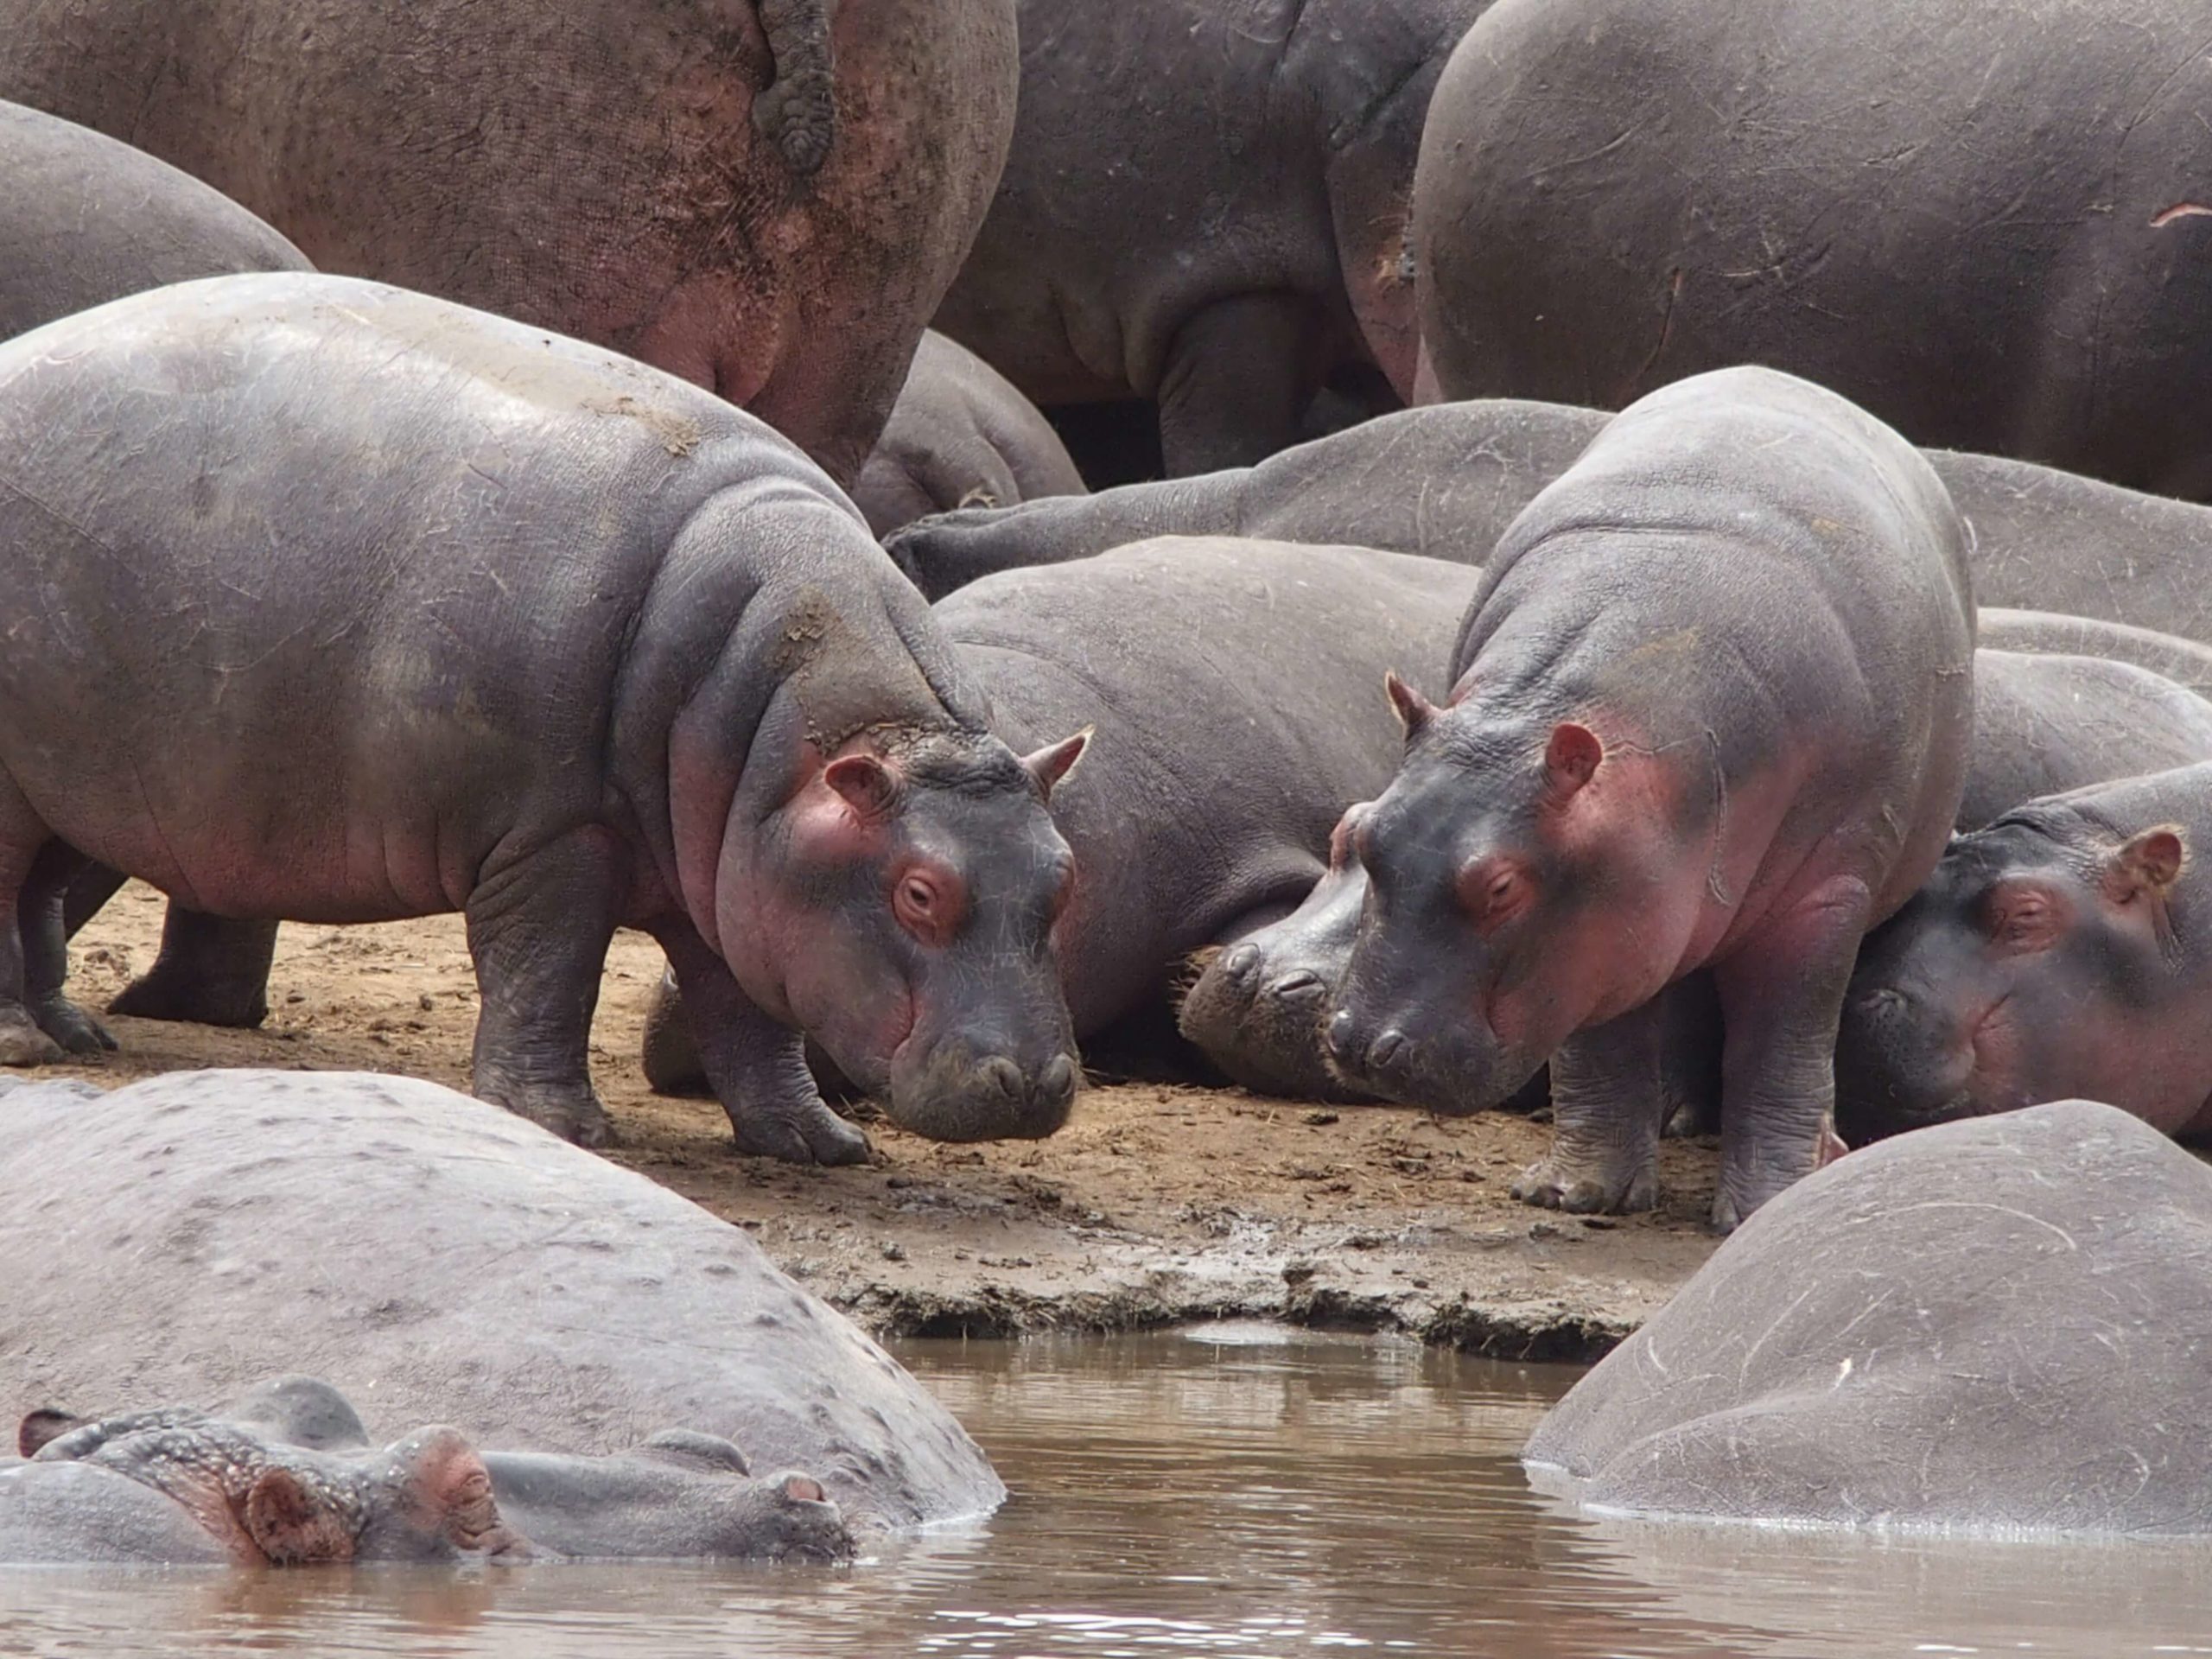 Picture of hippos - what do they eat?